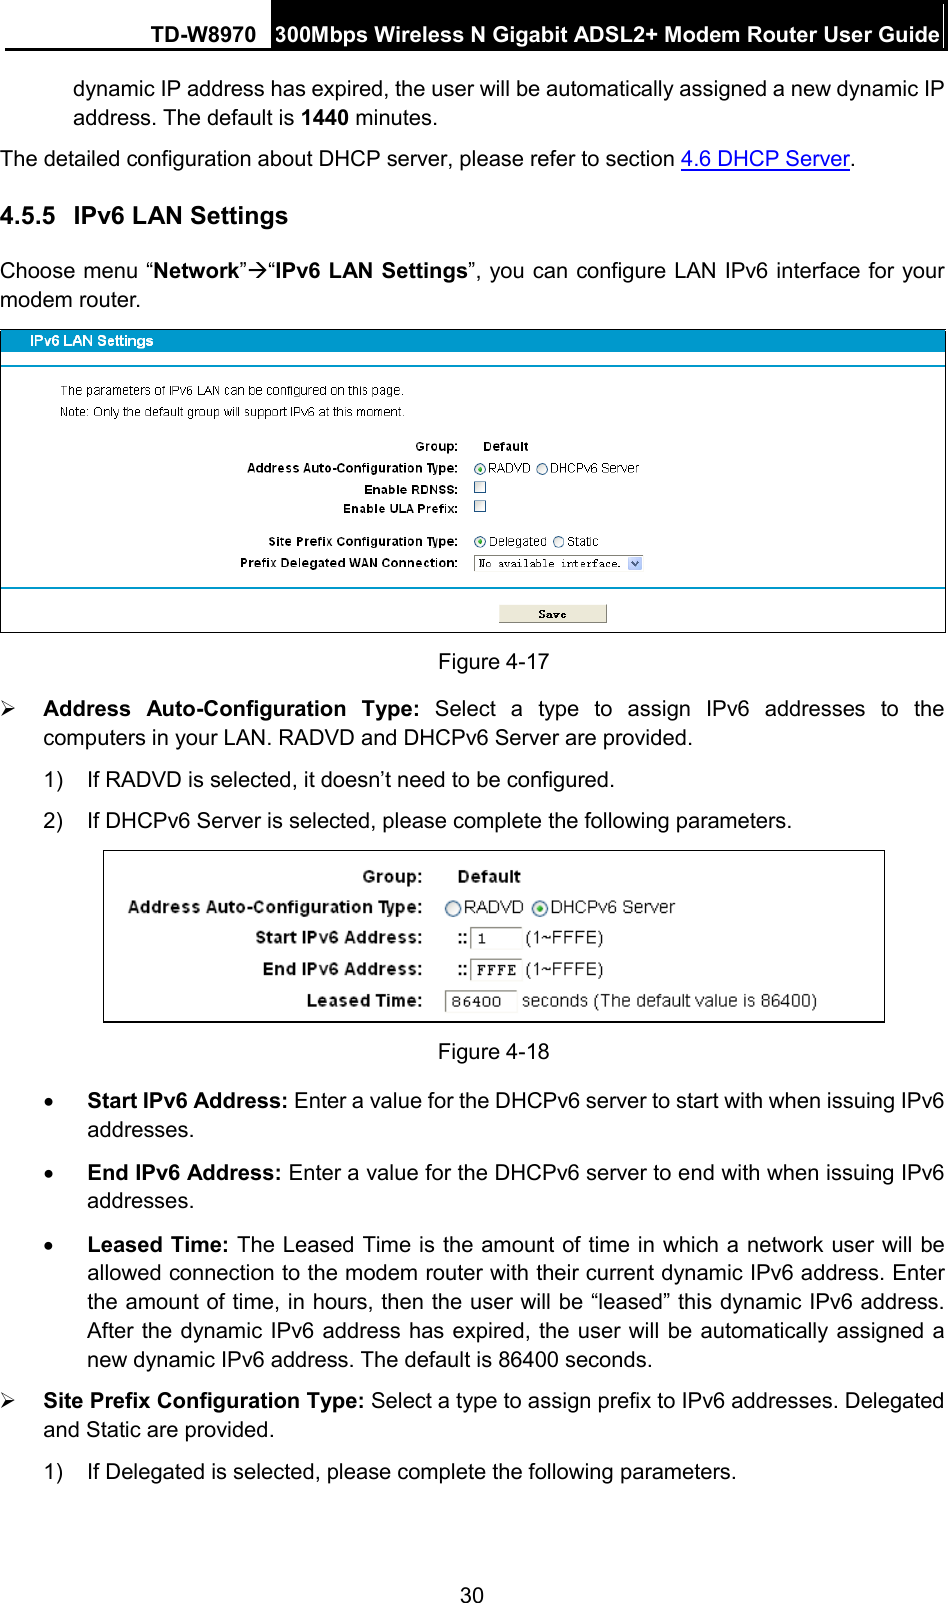 TD-W8970 300Mbps Wireless N Gigabit ADSL2+ Modem Router User Guide  dynamic IP address has expired, the user will be automatically assigned a new dynamic IP address. The default is 1440 minutes. The detailed configuration about DHCP server, please refer to section 4.6 DHCP Server. 4.5.5 IPv6 LAN Settings Choose menu “Network”“IPv6 LAN Settings”, you can configure LAN IPv6 interface for your modem router.  Figure 4-17  Address  Auto-Configuration Type: Select  a type to assign  IPv6 addresses to the computers in your LAN. RADVD and DHCPv6 Server are provided. 1) If RADVD is selected, it doesn’t need to be configured. 2)  If DHCPv6 Server is selected, please complete the following parameters.  Figure 4-18 • Start IPv6 Address: Enter a value for the DHCPv6 server to start with when issuing IPv6 addresses. • End IPv6 Address: Enter a value for the DHCPv6 server to end with when issuing IPv6 addresses. • Leased Time: The Leased Time is the amount of time in which a network user will be allowed connection to the modem router with their current dynamic IPv6 address. Enter the amount of time, in hours, then the user will be “leased” this dynamic IPv6 address. After the dynamic IPv6 address has expired, the user will be automatically assigned a new dynamic IPv6 address. The default is 86400 seconds.  Site Prefix Configuration Type: Select a type to assign prefix to IPv6 addresses. Delegated and Static are provided. 1)  If Delegated is selected, please complete the following parameters. 30 